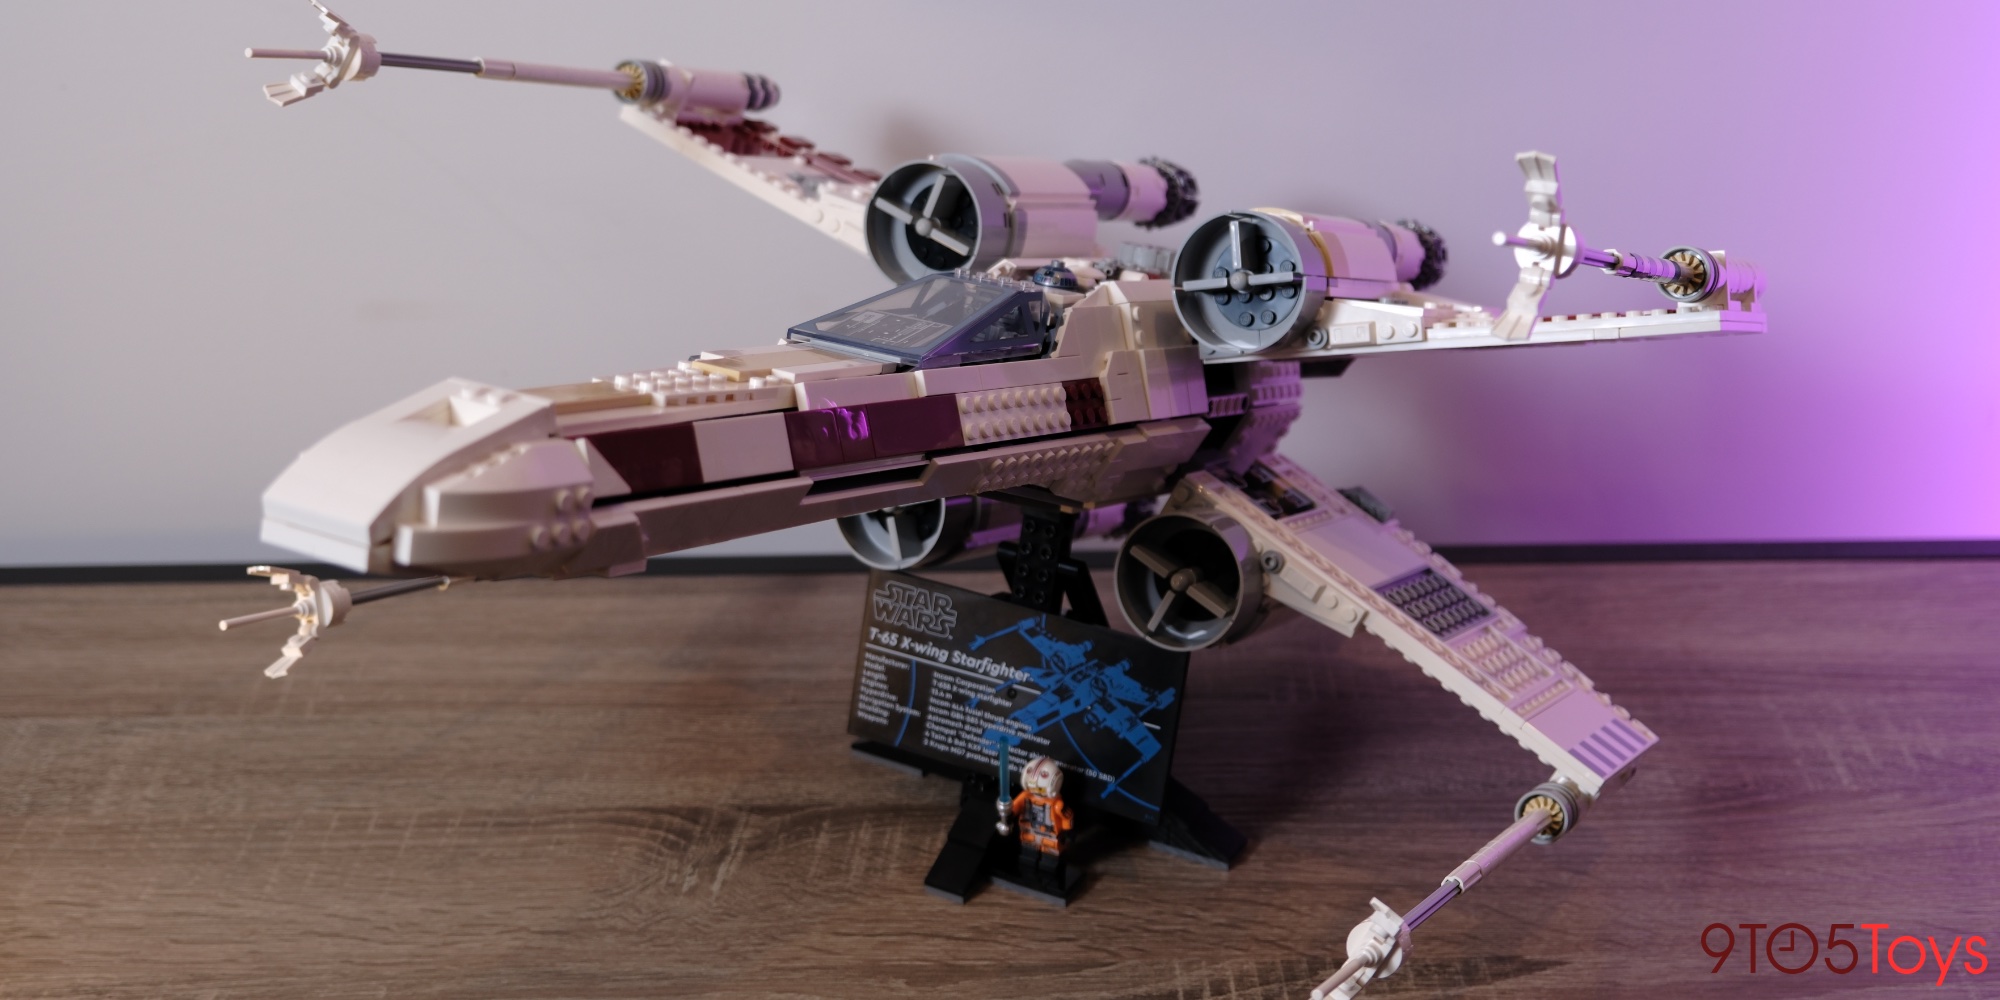 LEGO UCS X-Wing review: Third time's the charm